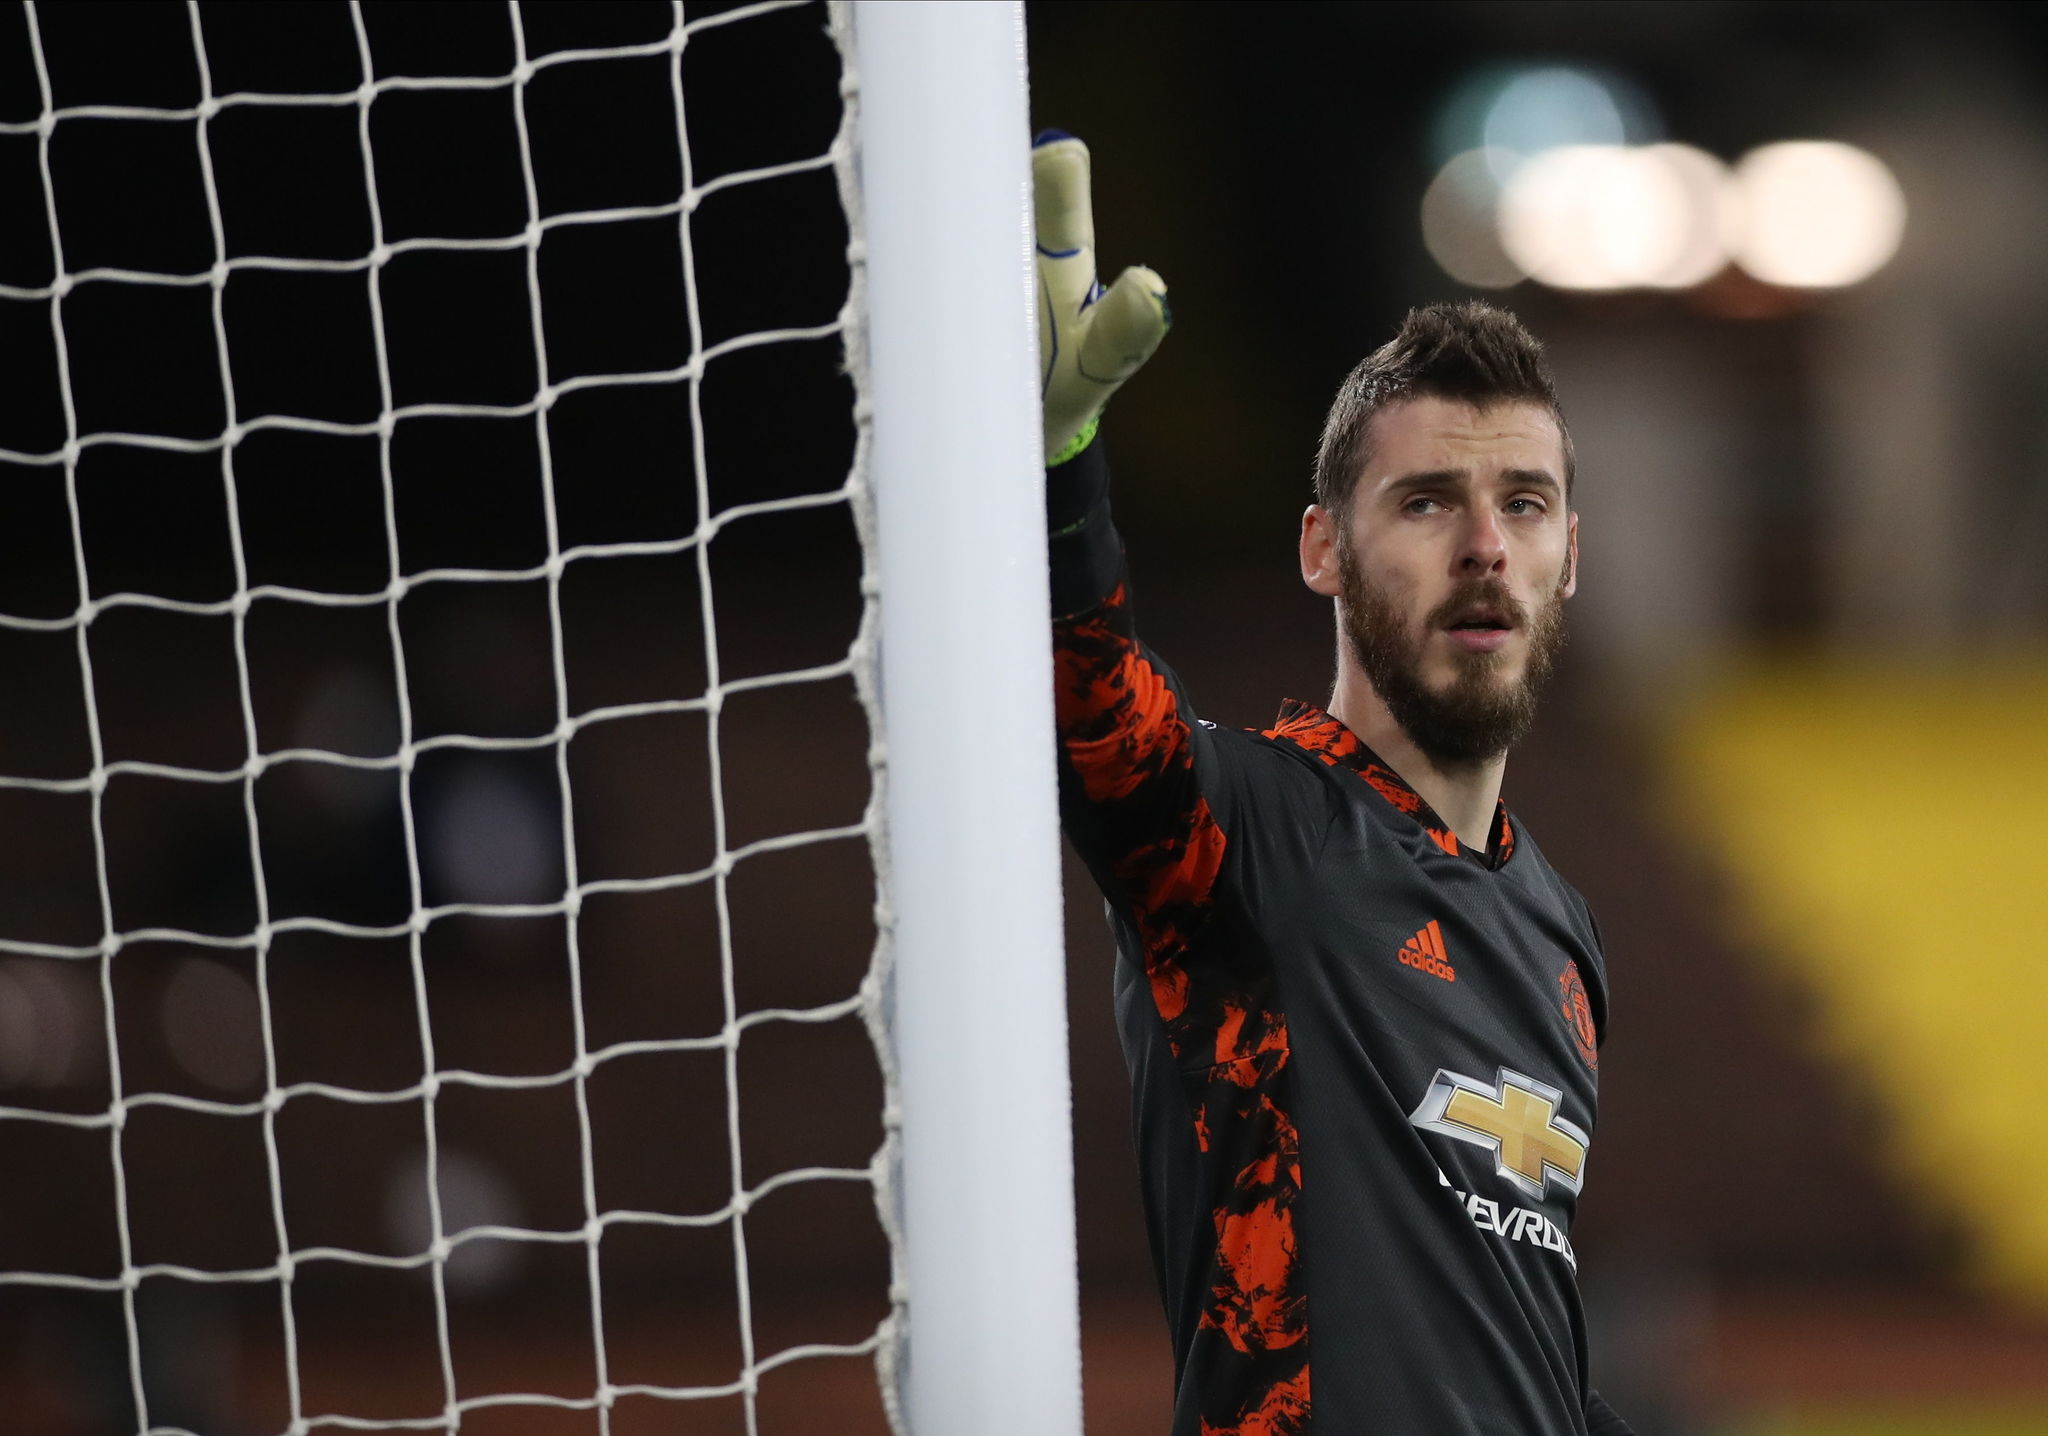 London (United Kingdom), 20/01/2021.- Manchester United's goalkeeper David de lt;HIT gt;Gea lt;/HIT gt; during the English Premier League soccer match between Fulham FC and Manchester United in London, Britain, 20 January 2021. (Reino Unido, Londres) EFE/EPA/Peter Cziborra / POOL EDITORIAL USE ONLY. No use with unauthorized audio, video, data, fixture lists, club/league logos or 'live' services. Online in-match use limited to 120 images, no video emulation. No use in betting, games or single club/league/player publications